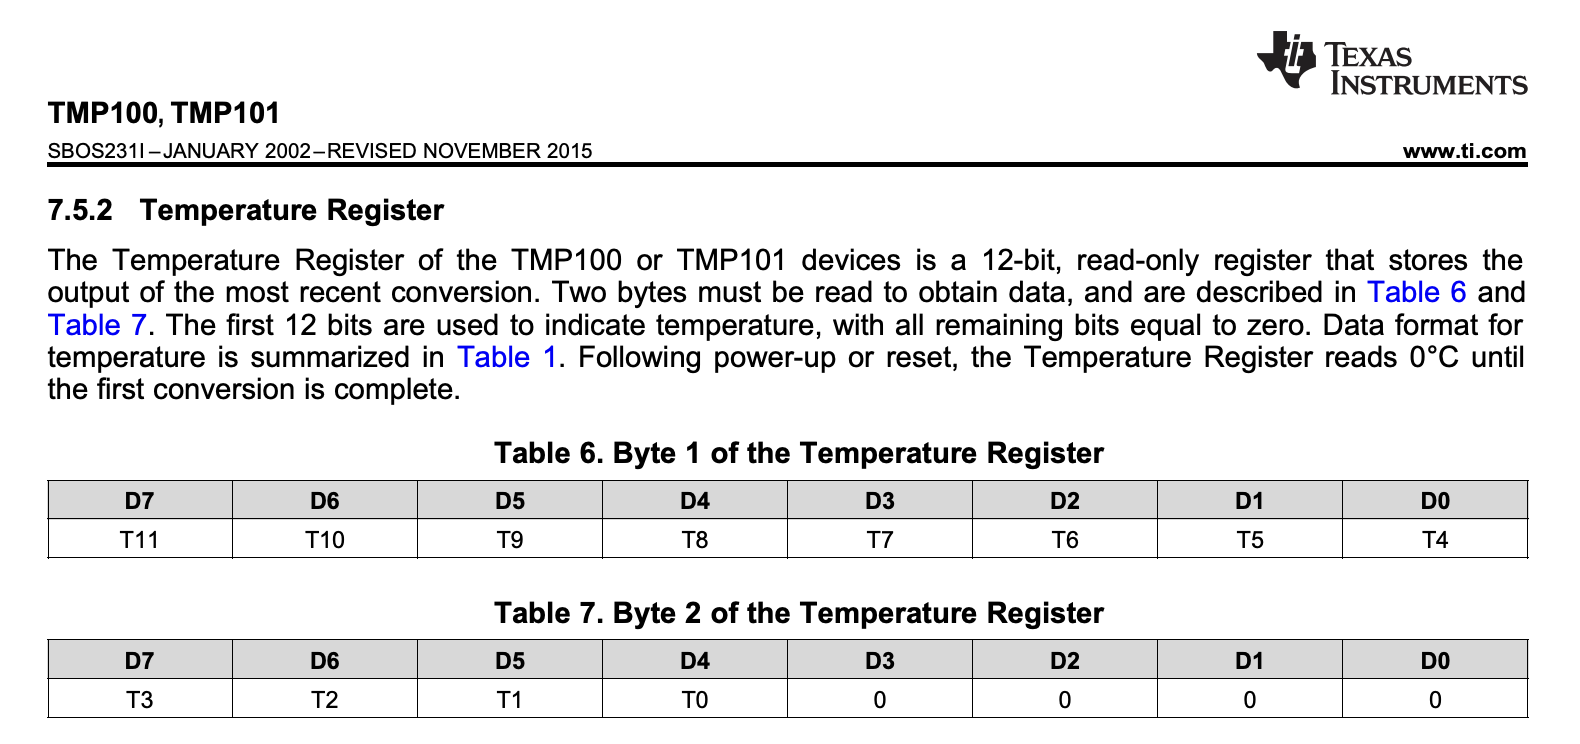 Example table describing what the bytes mean in a particular register